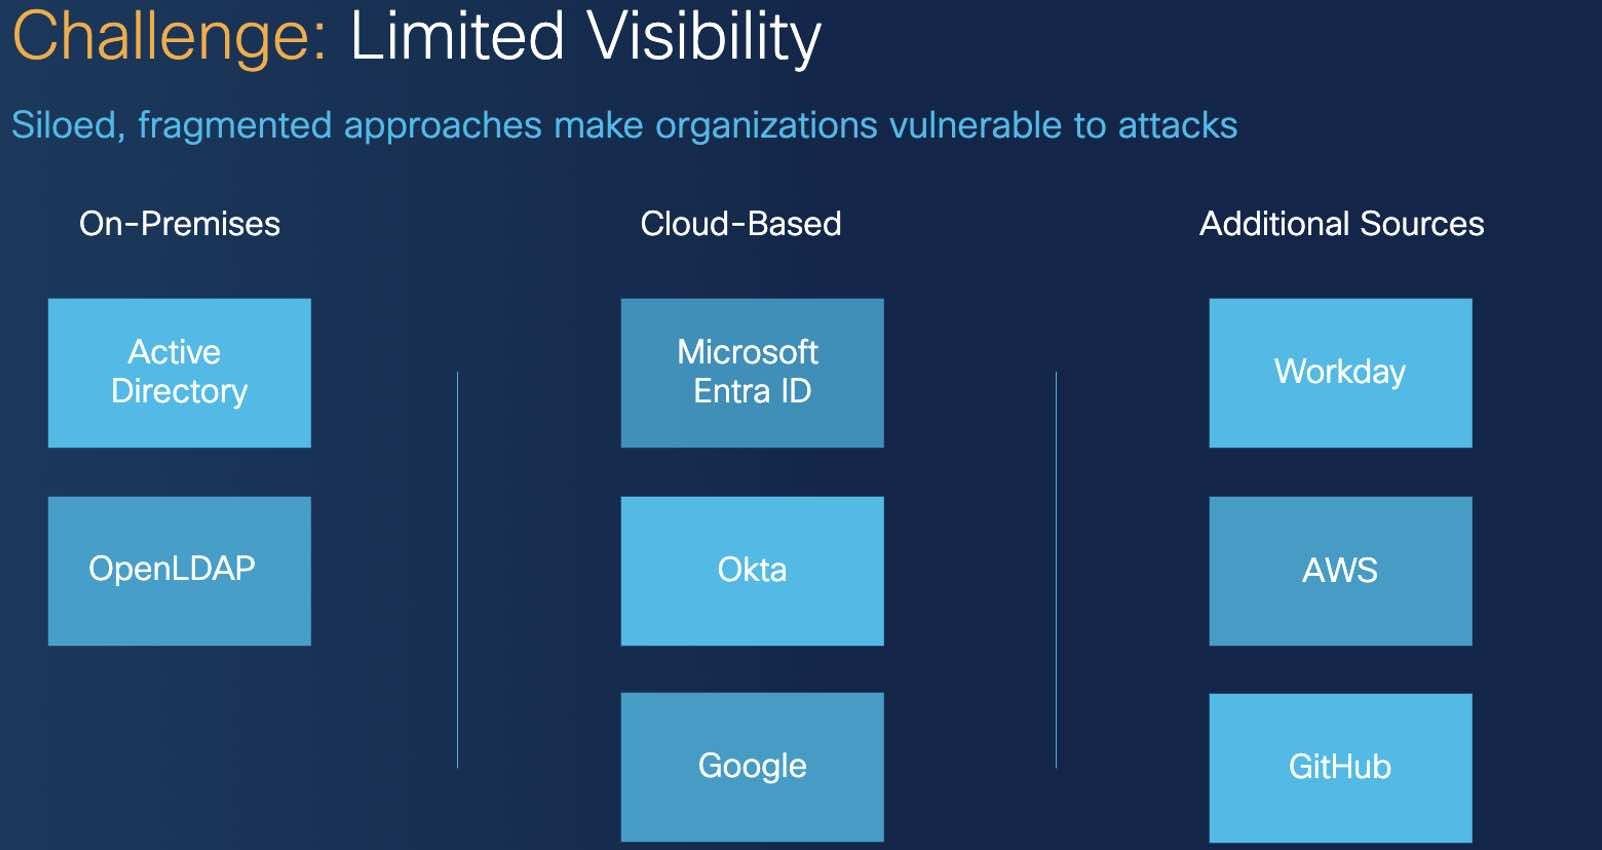 Challenge: Limited Visibility. Siloed, fragmented approaches make organizations vulnerable to attacks. The graphic lists on-premises (Active Directory, OpenLDAP), Cloud-Based (Microsoft Entra ID, Okta, Google) and Additional Sources (Workday, AWS, GitHub)